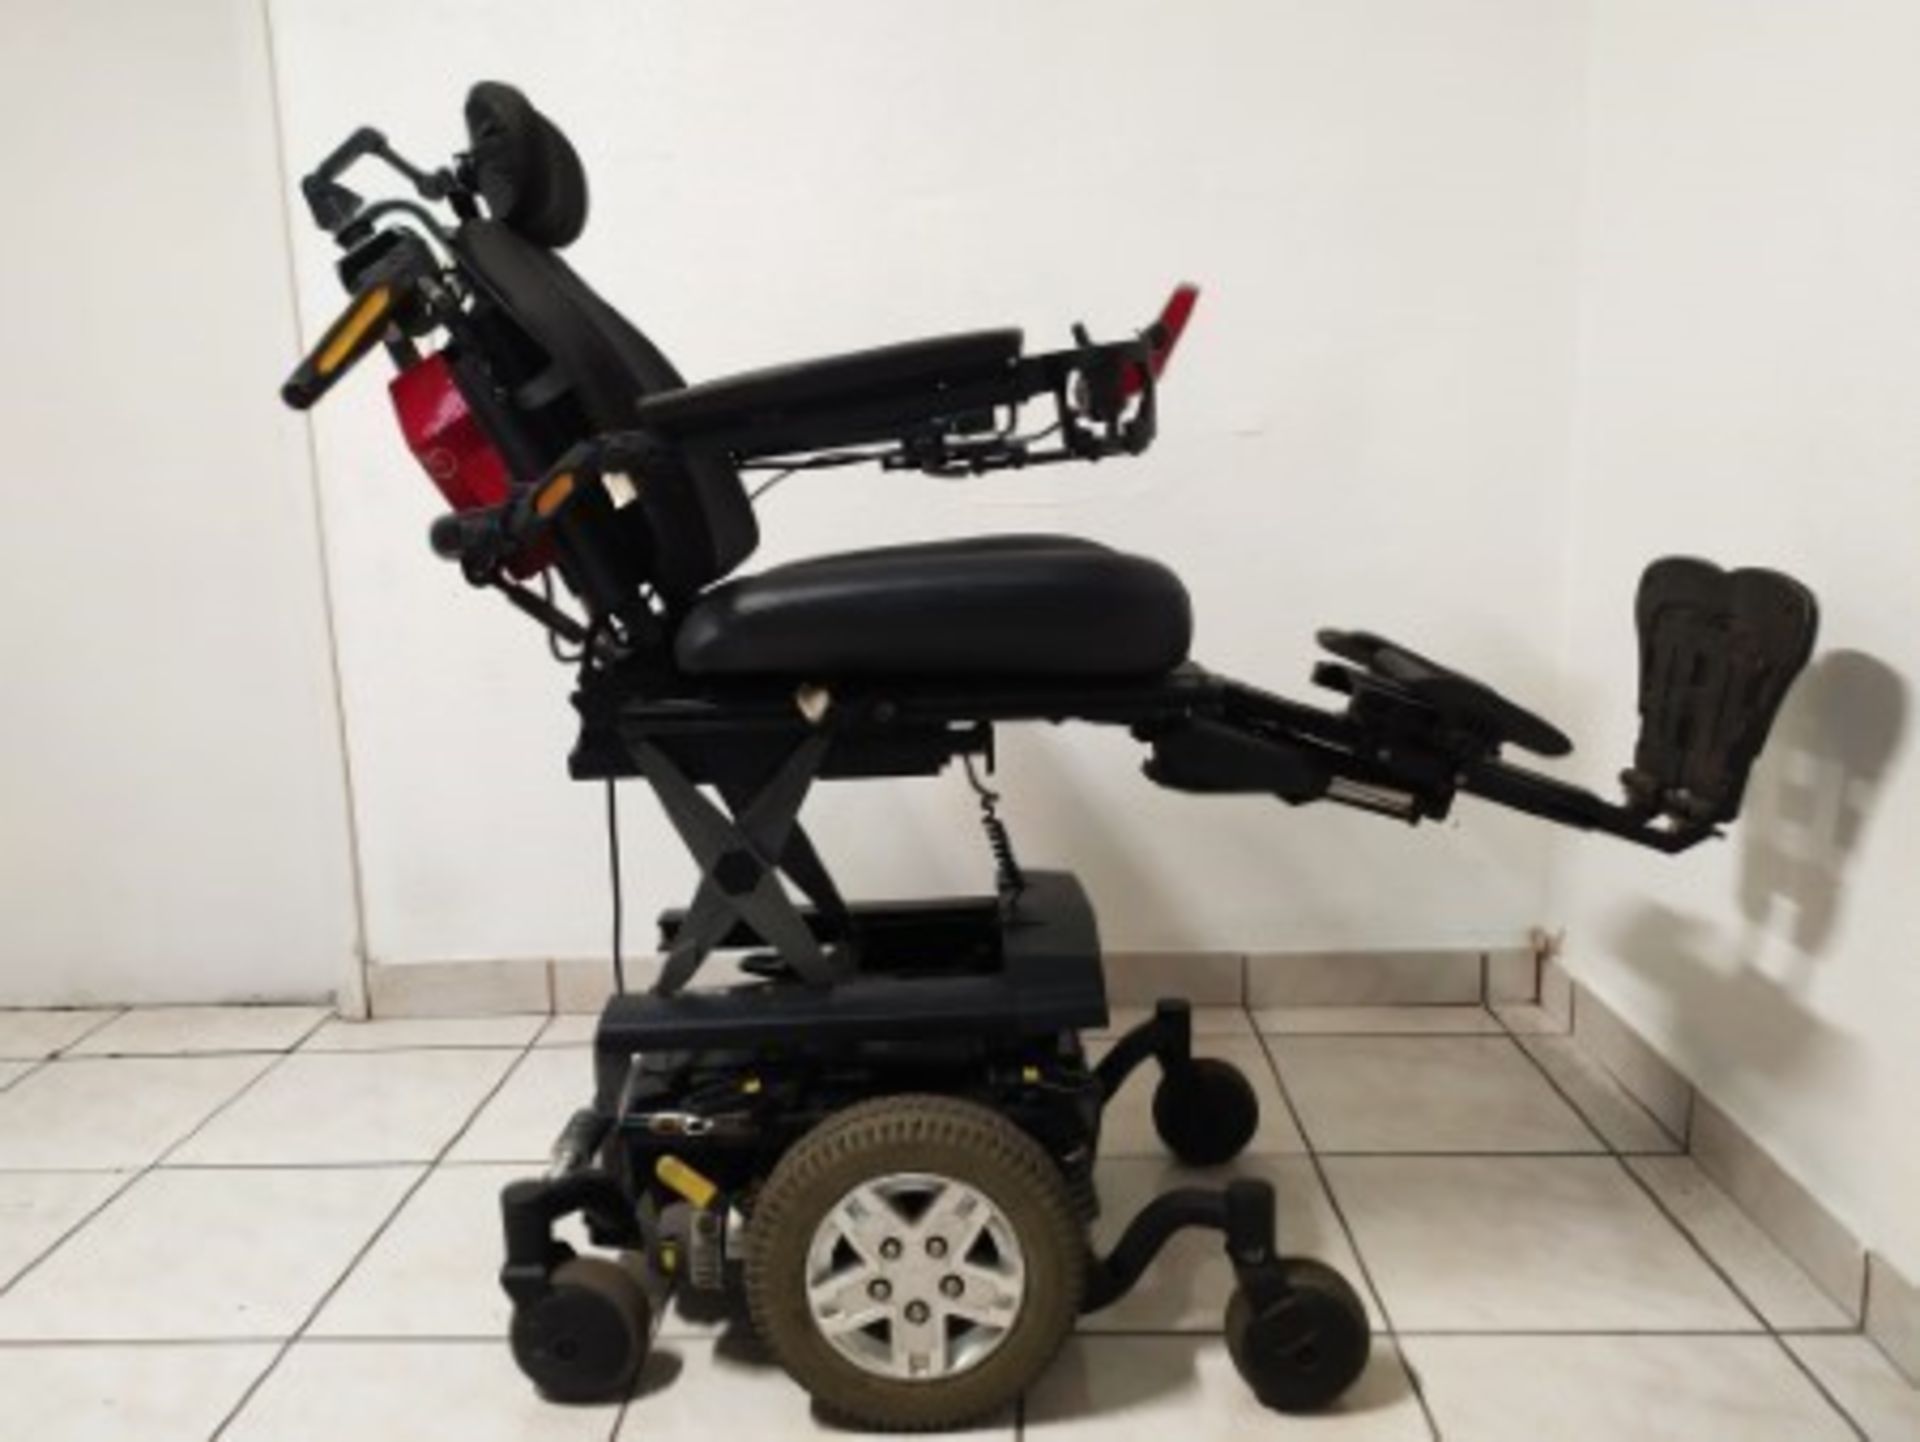 2015 QUANTUM Q6 EDGE 6-WHEEL REHAB POWER CHAIR WITH JOYSTICK CONTROL, KEYBOARD, RECLINING SEAT WITH - Image 6 of 9